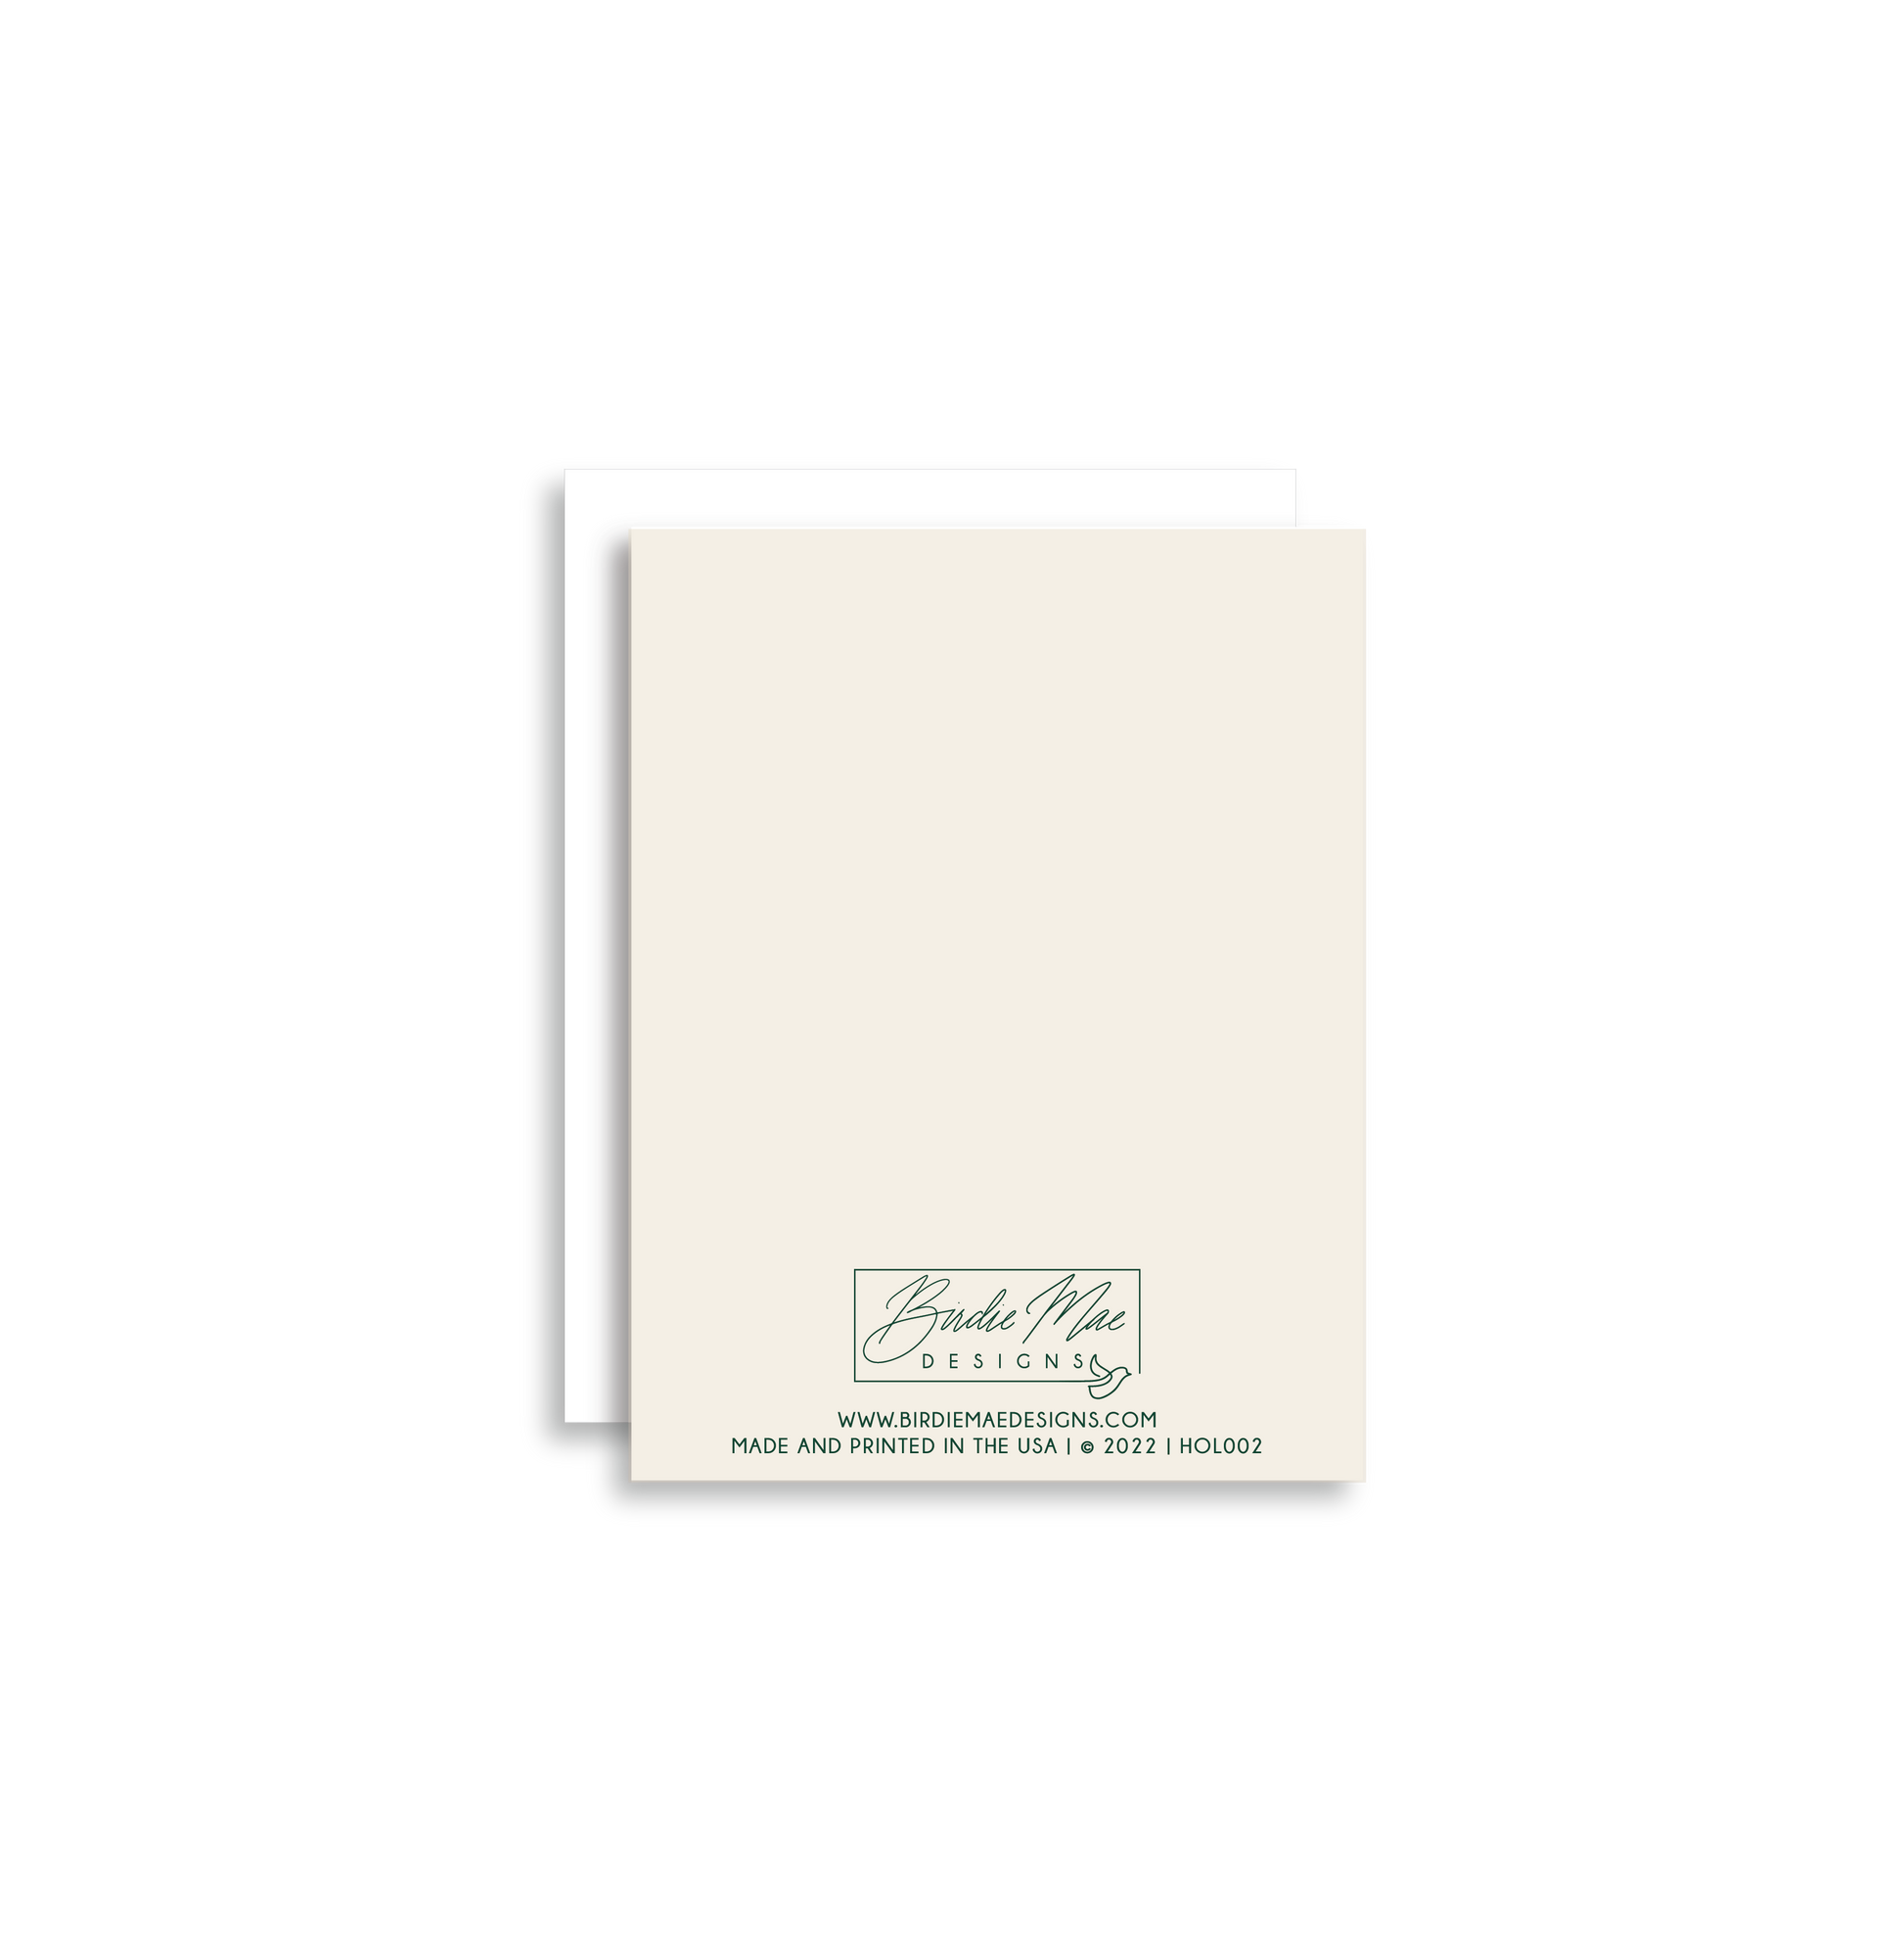 "Glory to God in the Highest!" Christmas Greeting Card is a festive way to bring joy during the holiday season. Each card is folded to 4.25" tall by 5.5" wide, is blank inside and comes with a matching white envelope. Cards are packaged in cellophane sleeves.